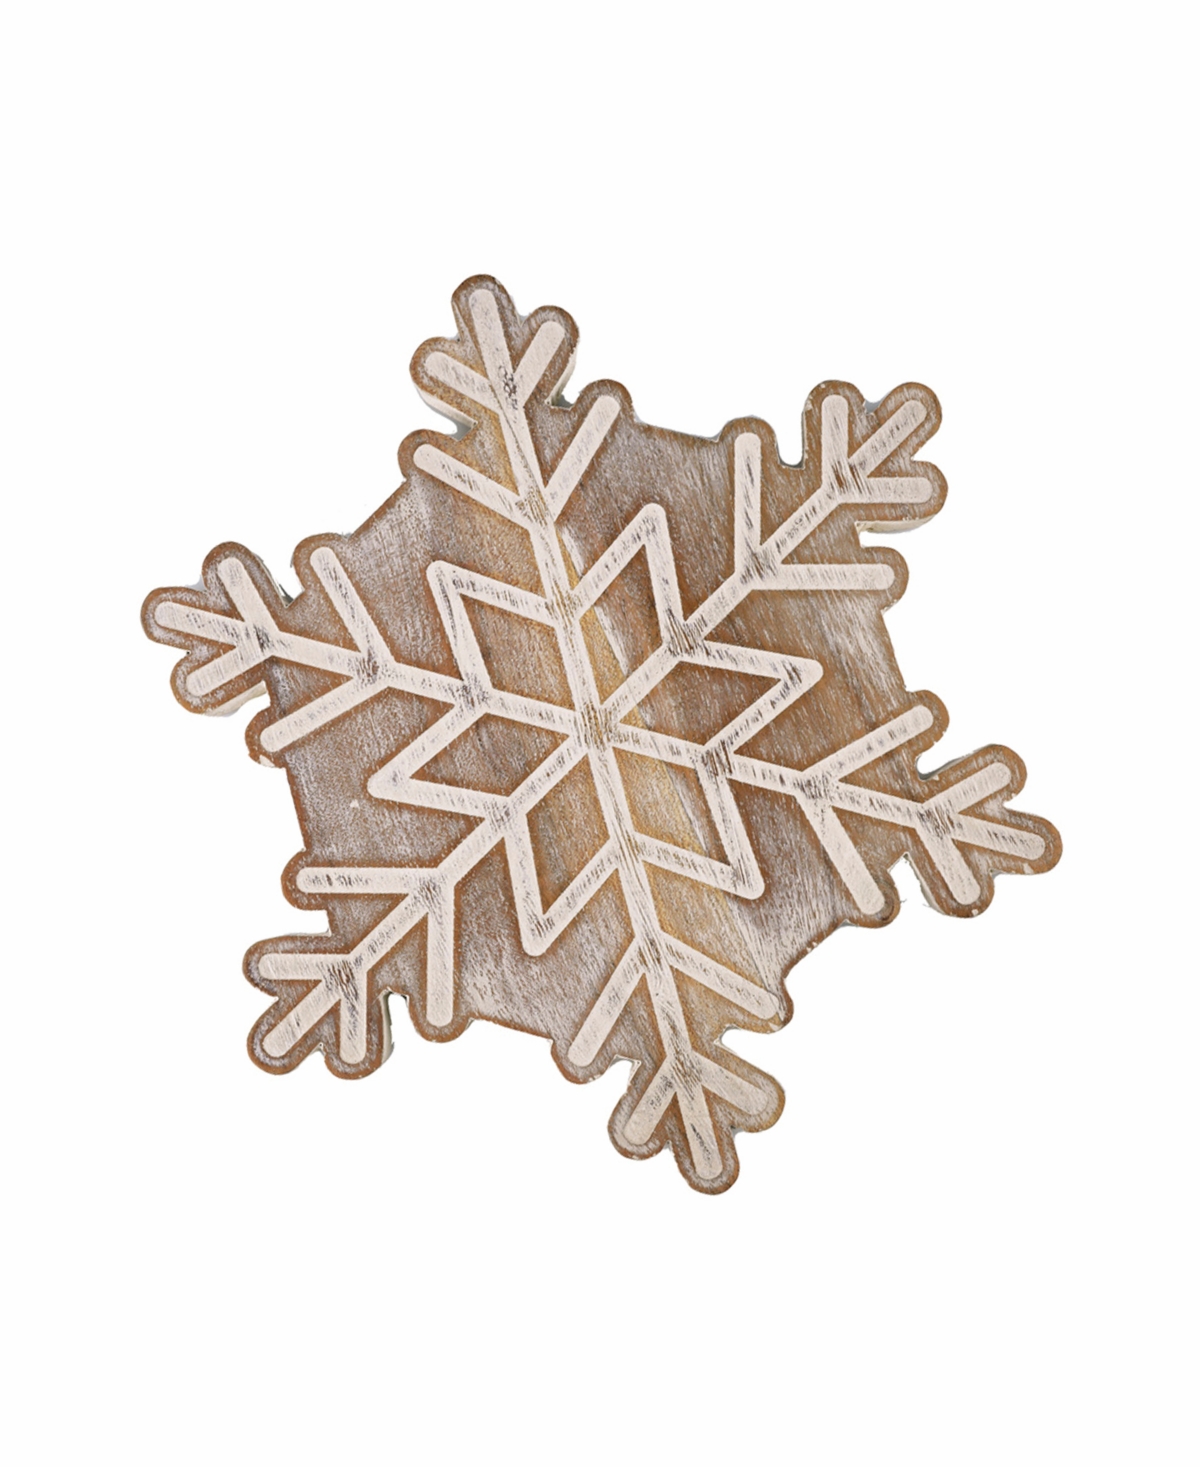 Godinger Snowflake Designed Trivet Carved Out Of Acacia Wood With A Washed Finish In Brown